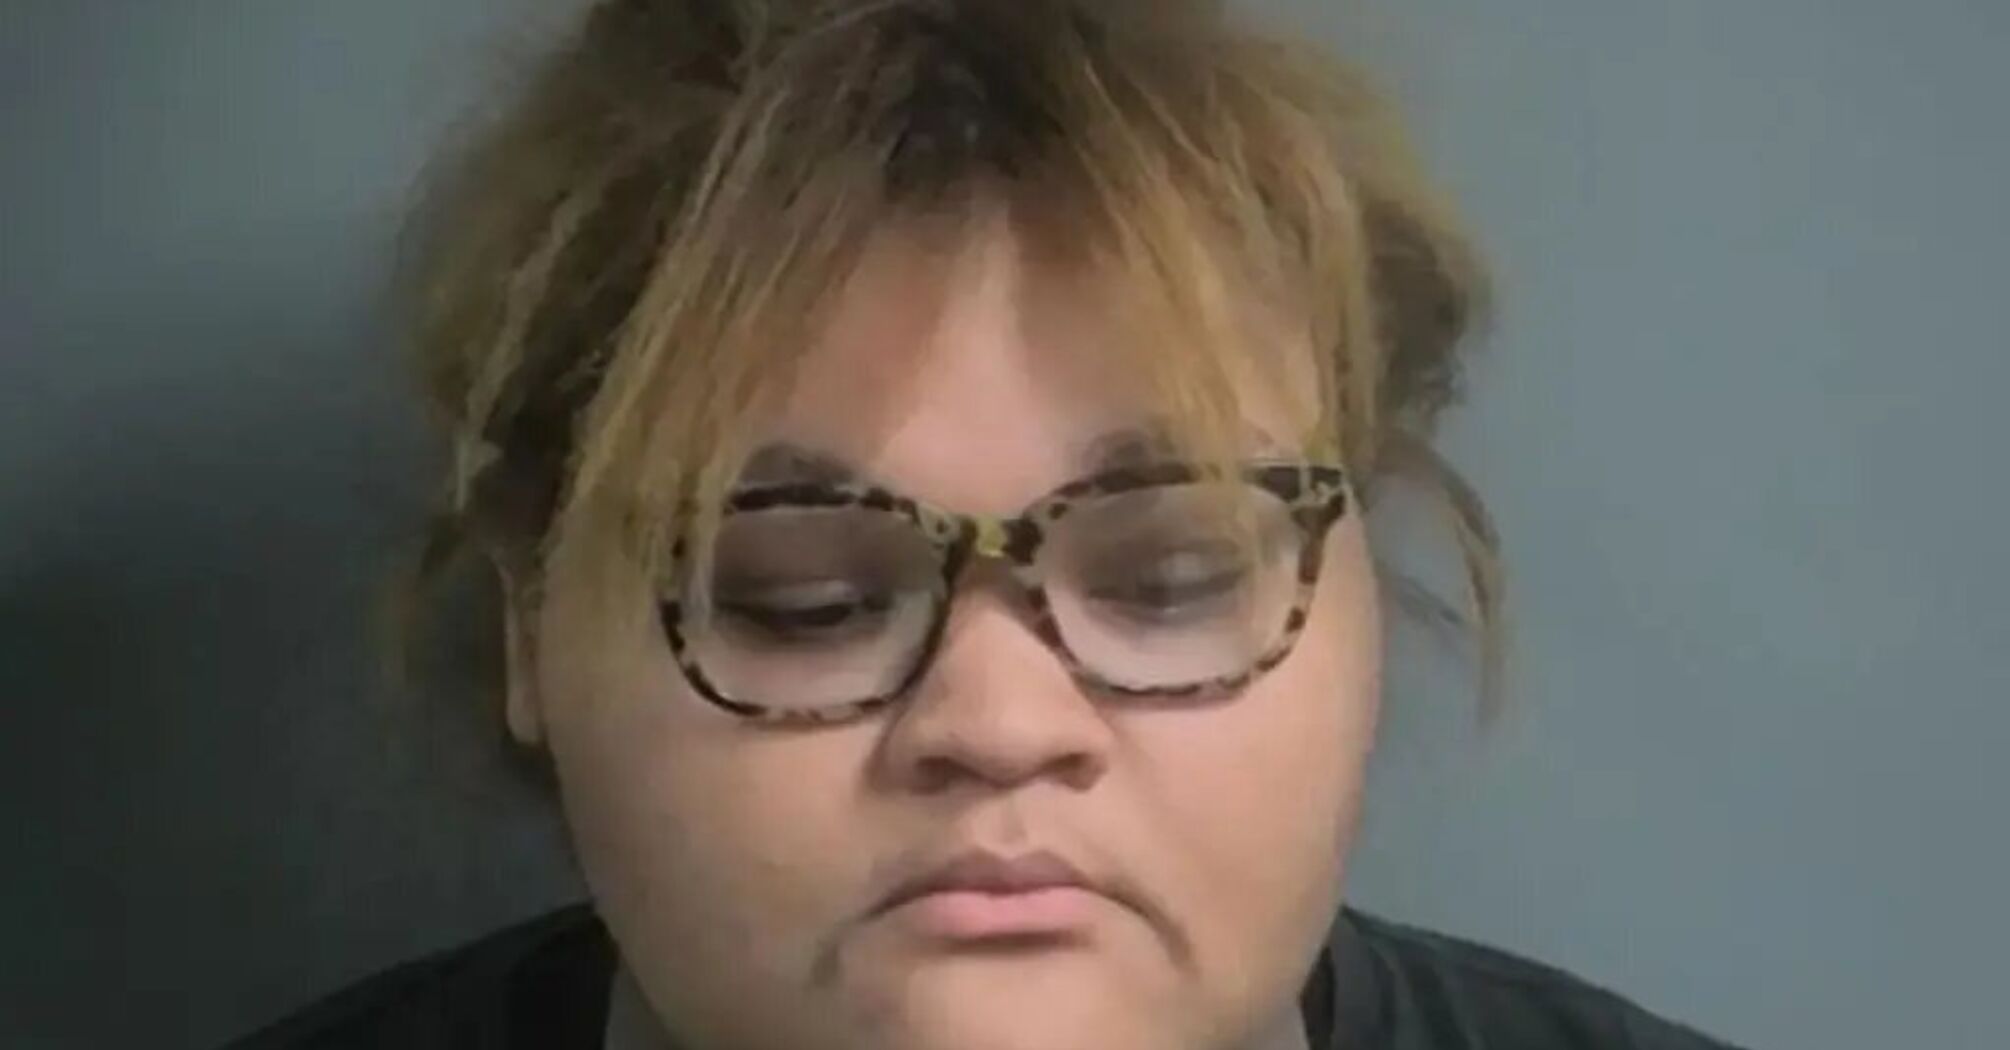 False report lands woman arrested after faking threats to escape date